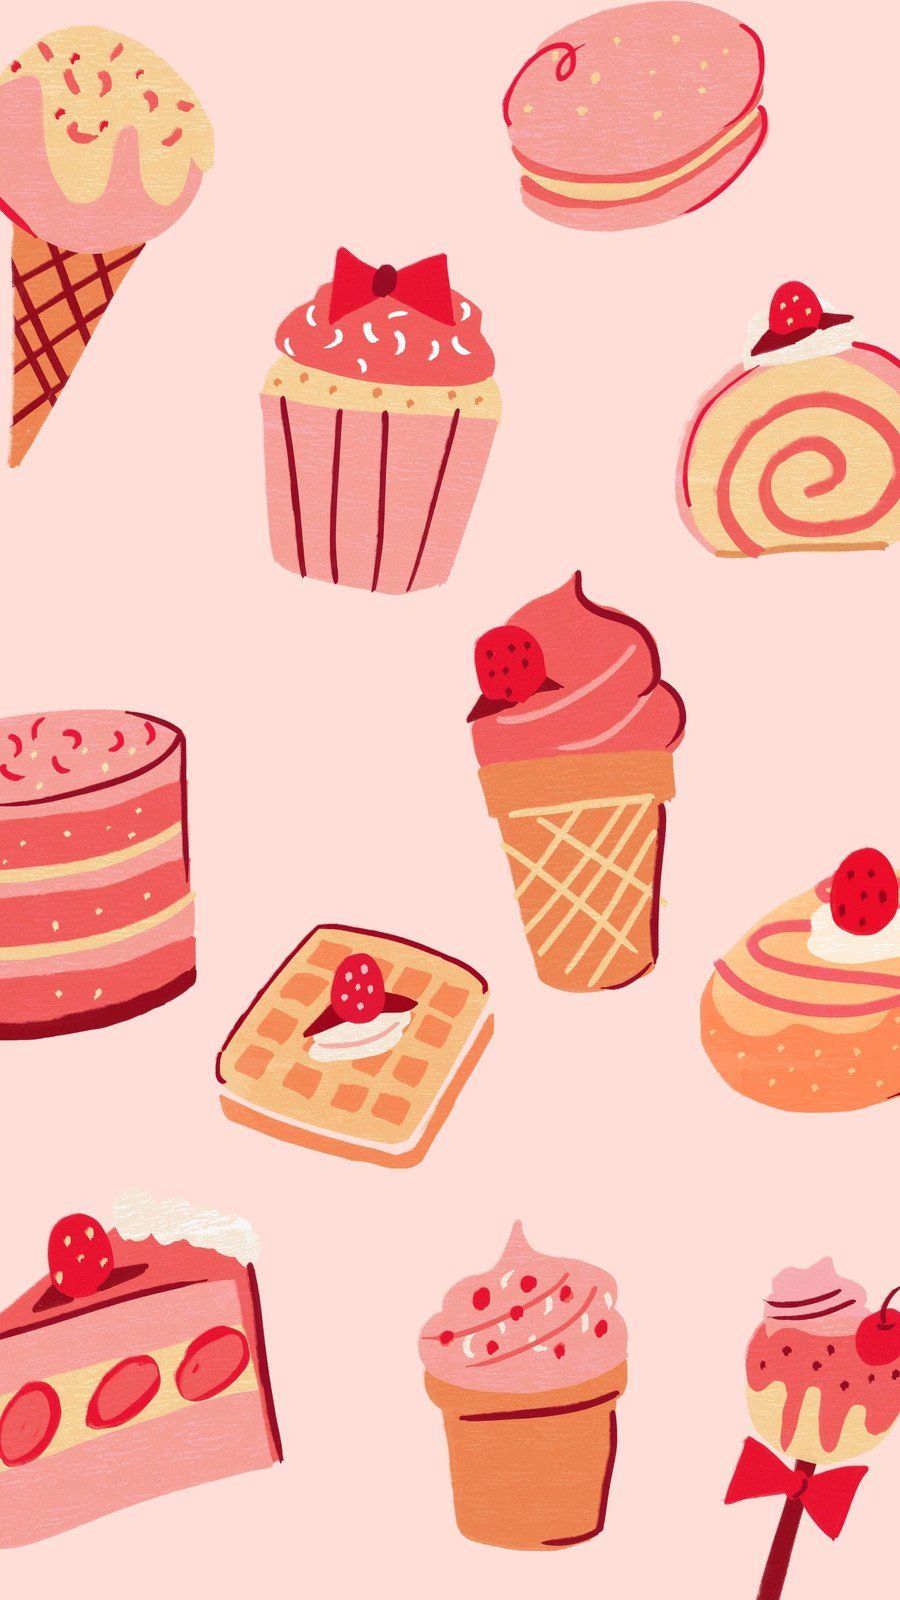 A pattern of various desserts including ice cream, waffles, cakes, and cupcakes. - Cake